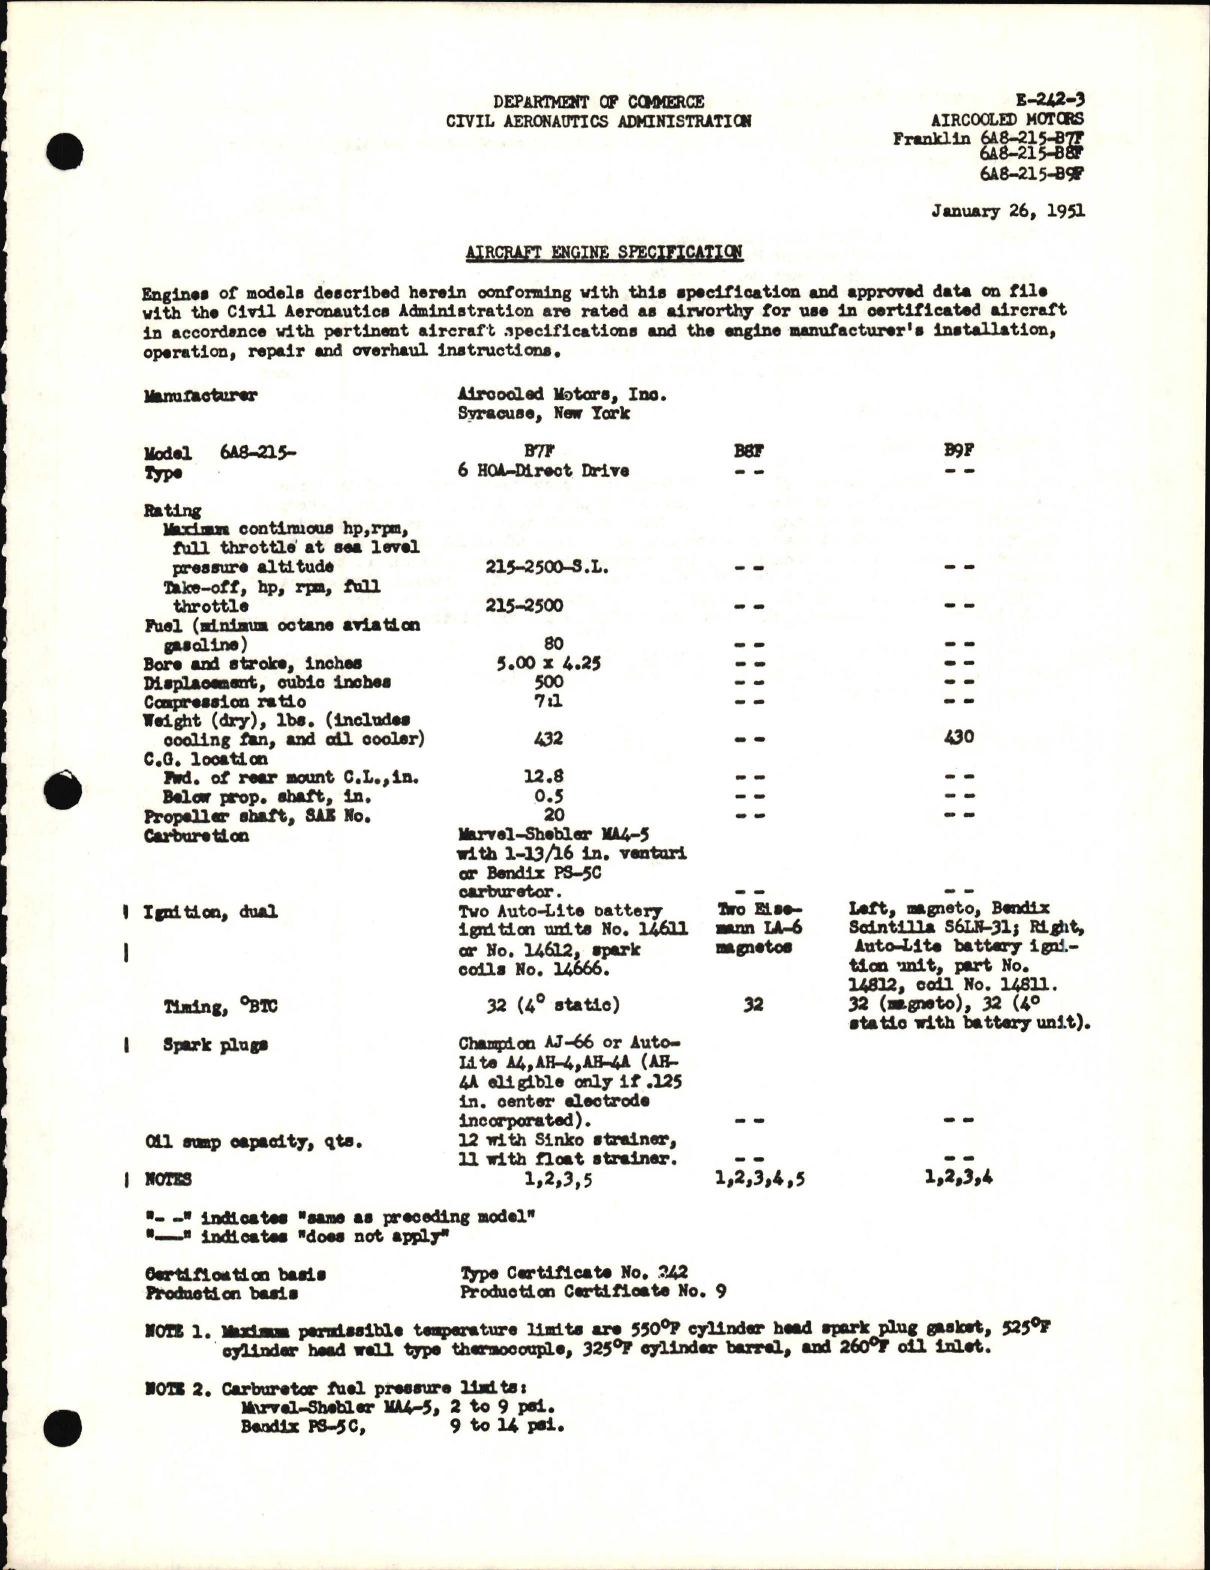 Sample page 1 from AirCorps Library document: 6A8-215-B7F, -B8F, and -B9F Air Cooled Motors